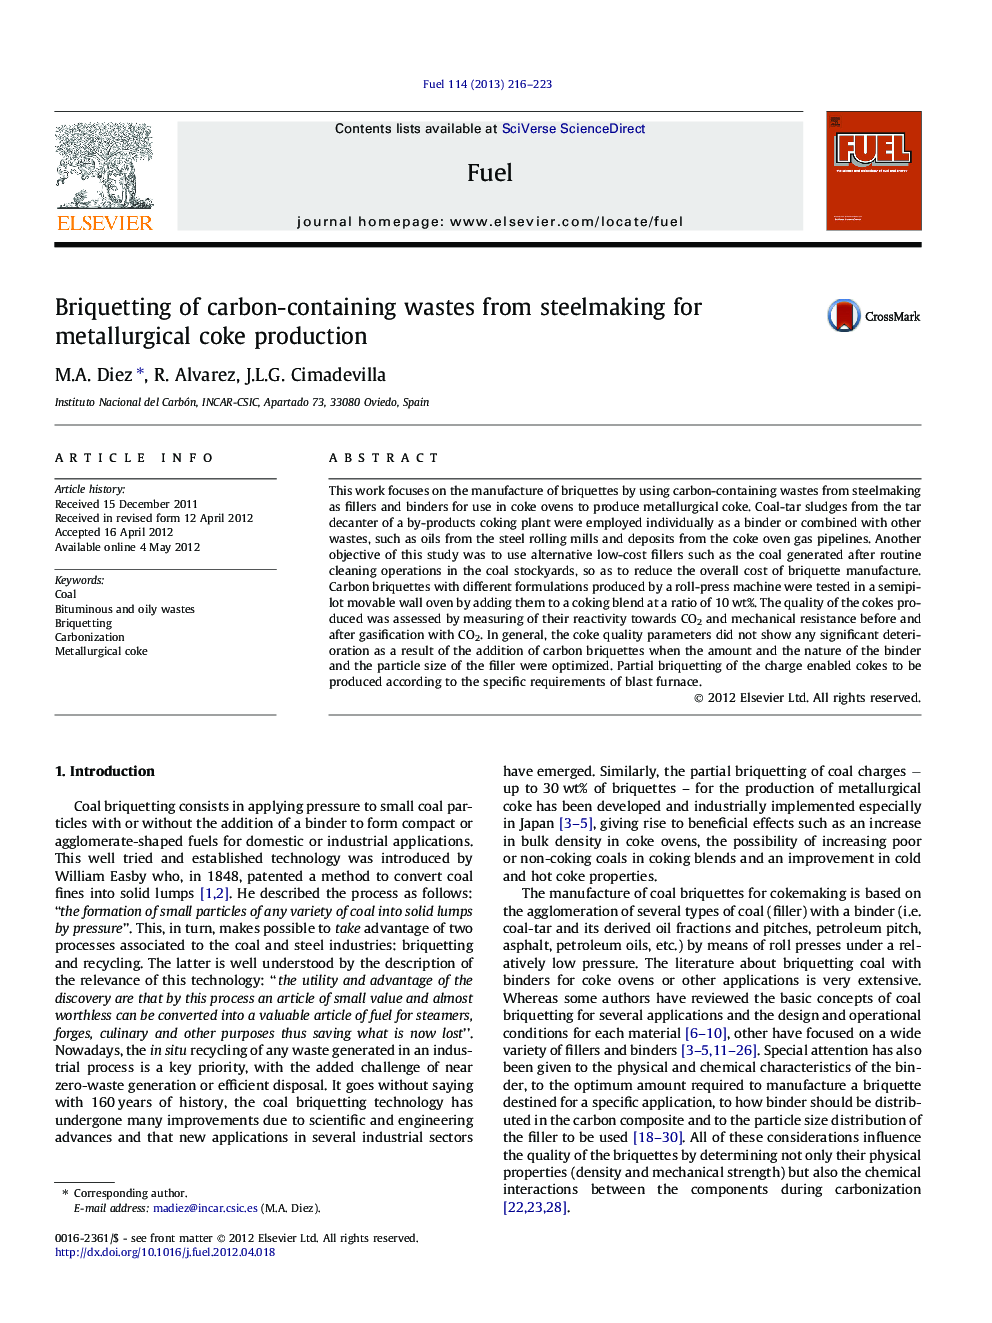 Briquetting of carbon-containing wastes from steelmaking for metallurgical coke production